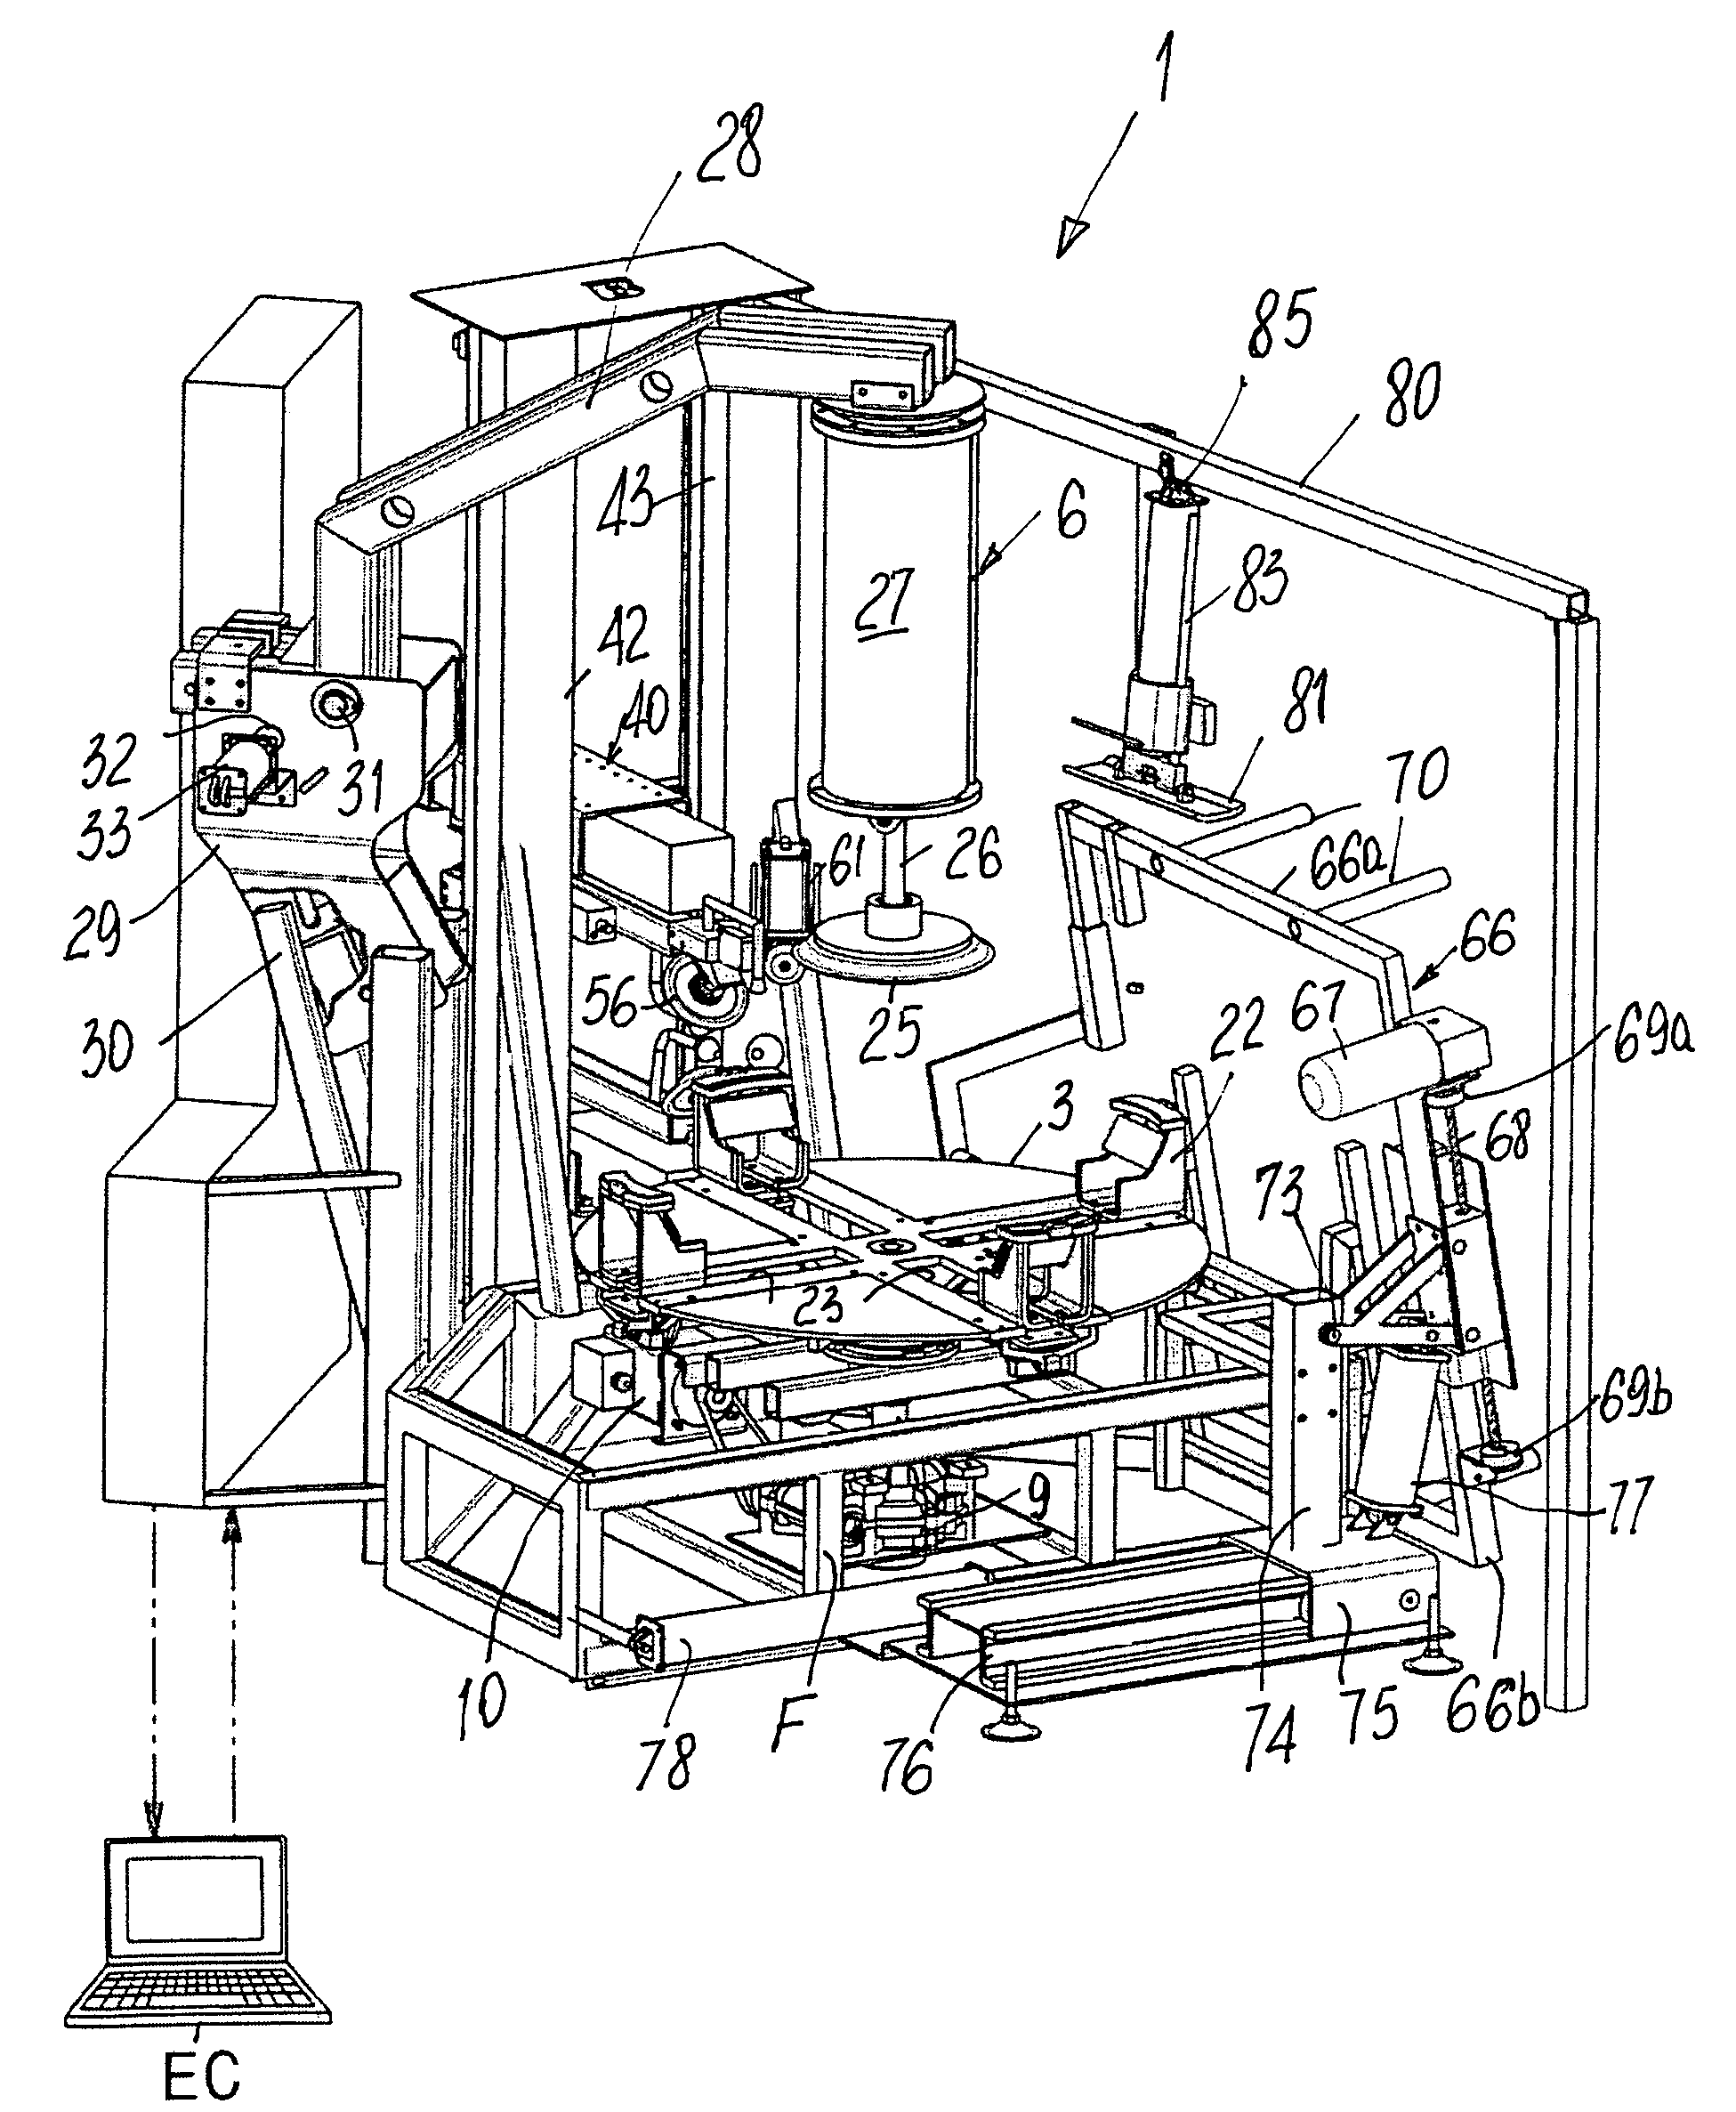 Apparatus for servicing a tired wheel